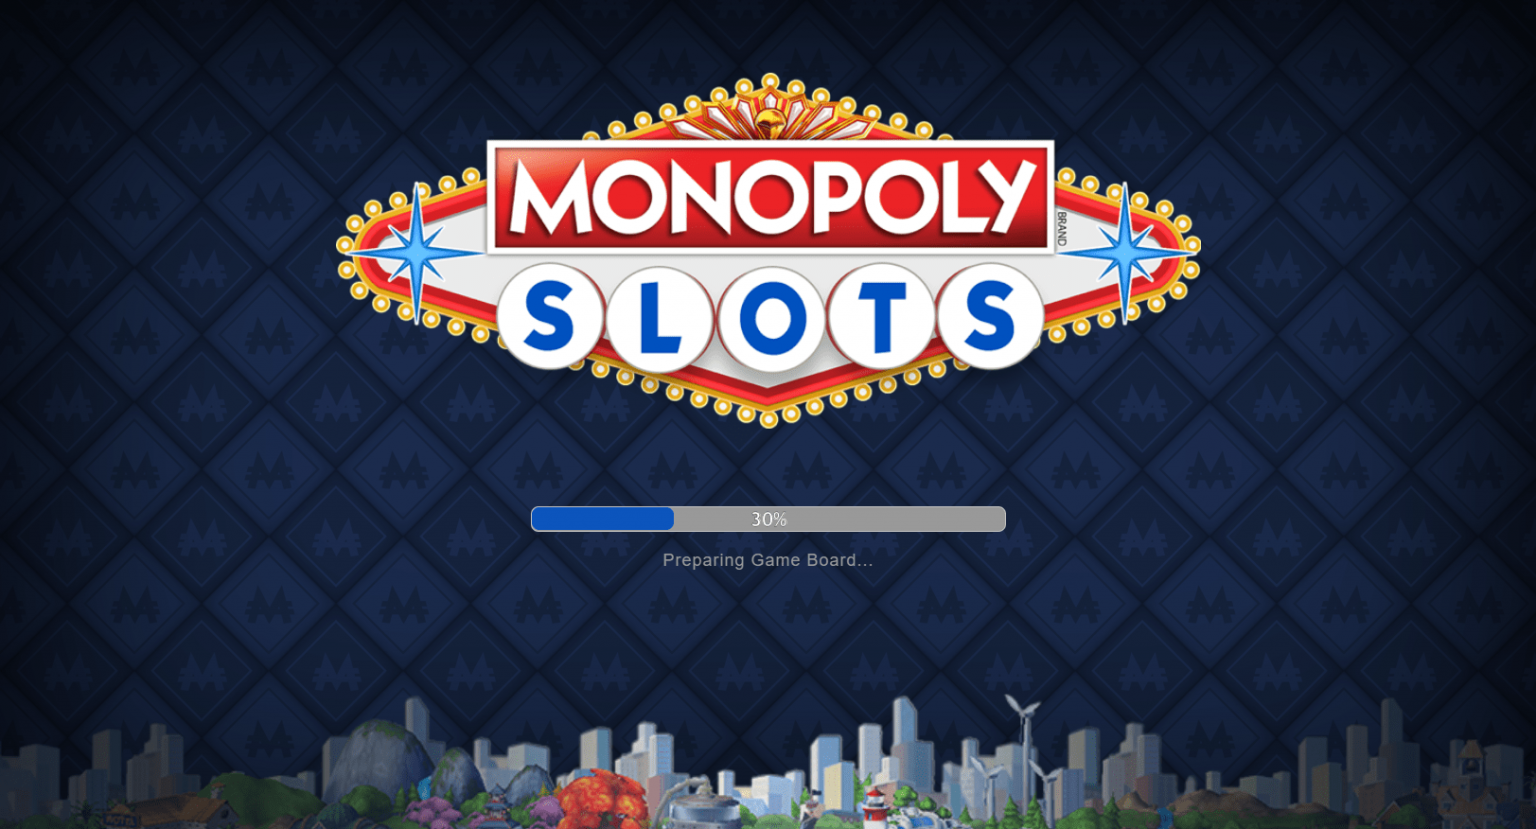 monopoly slots free coins twitter